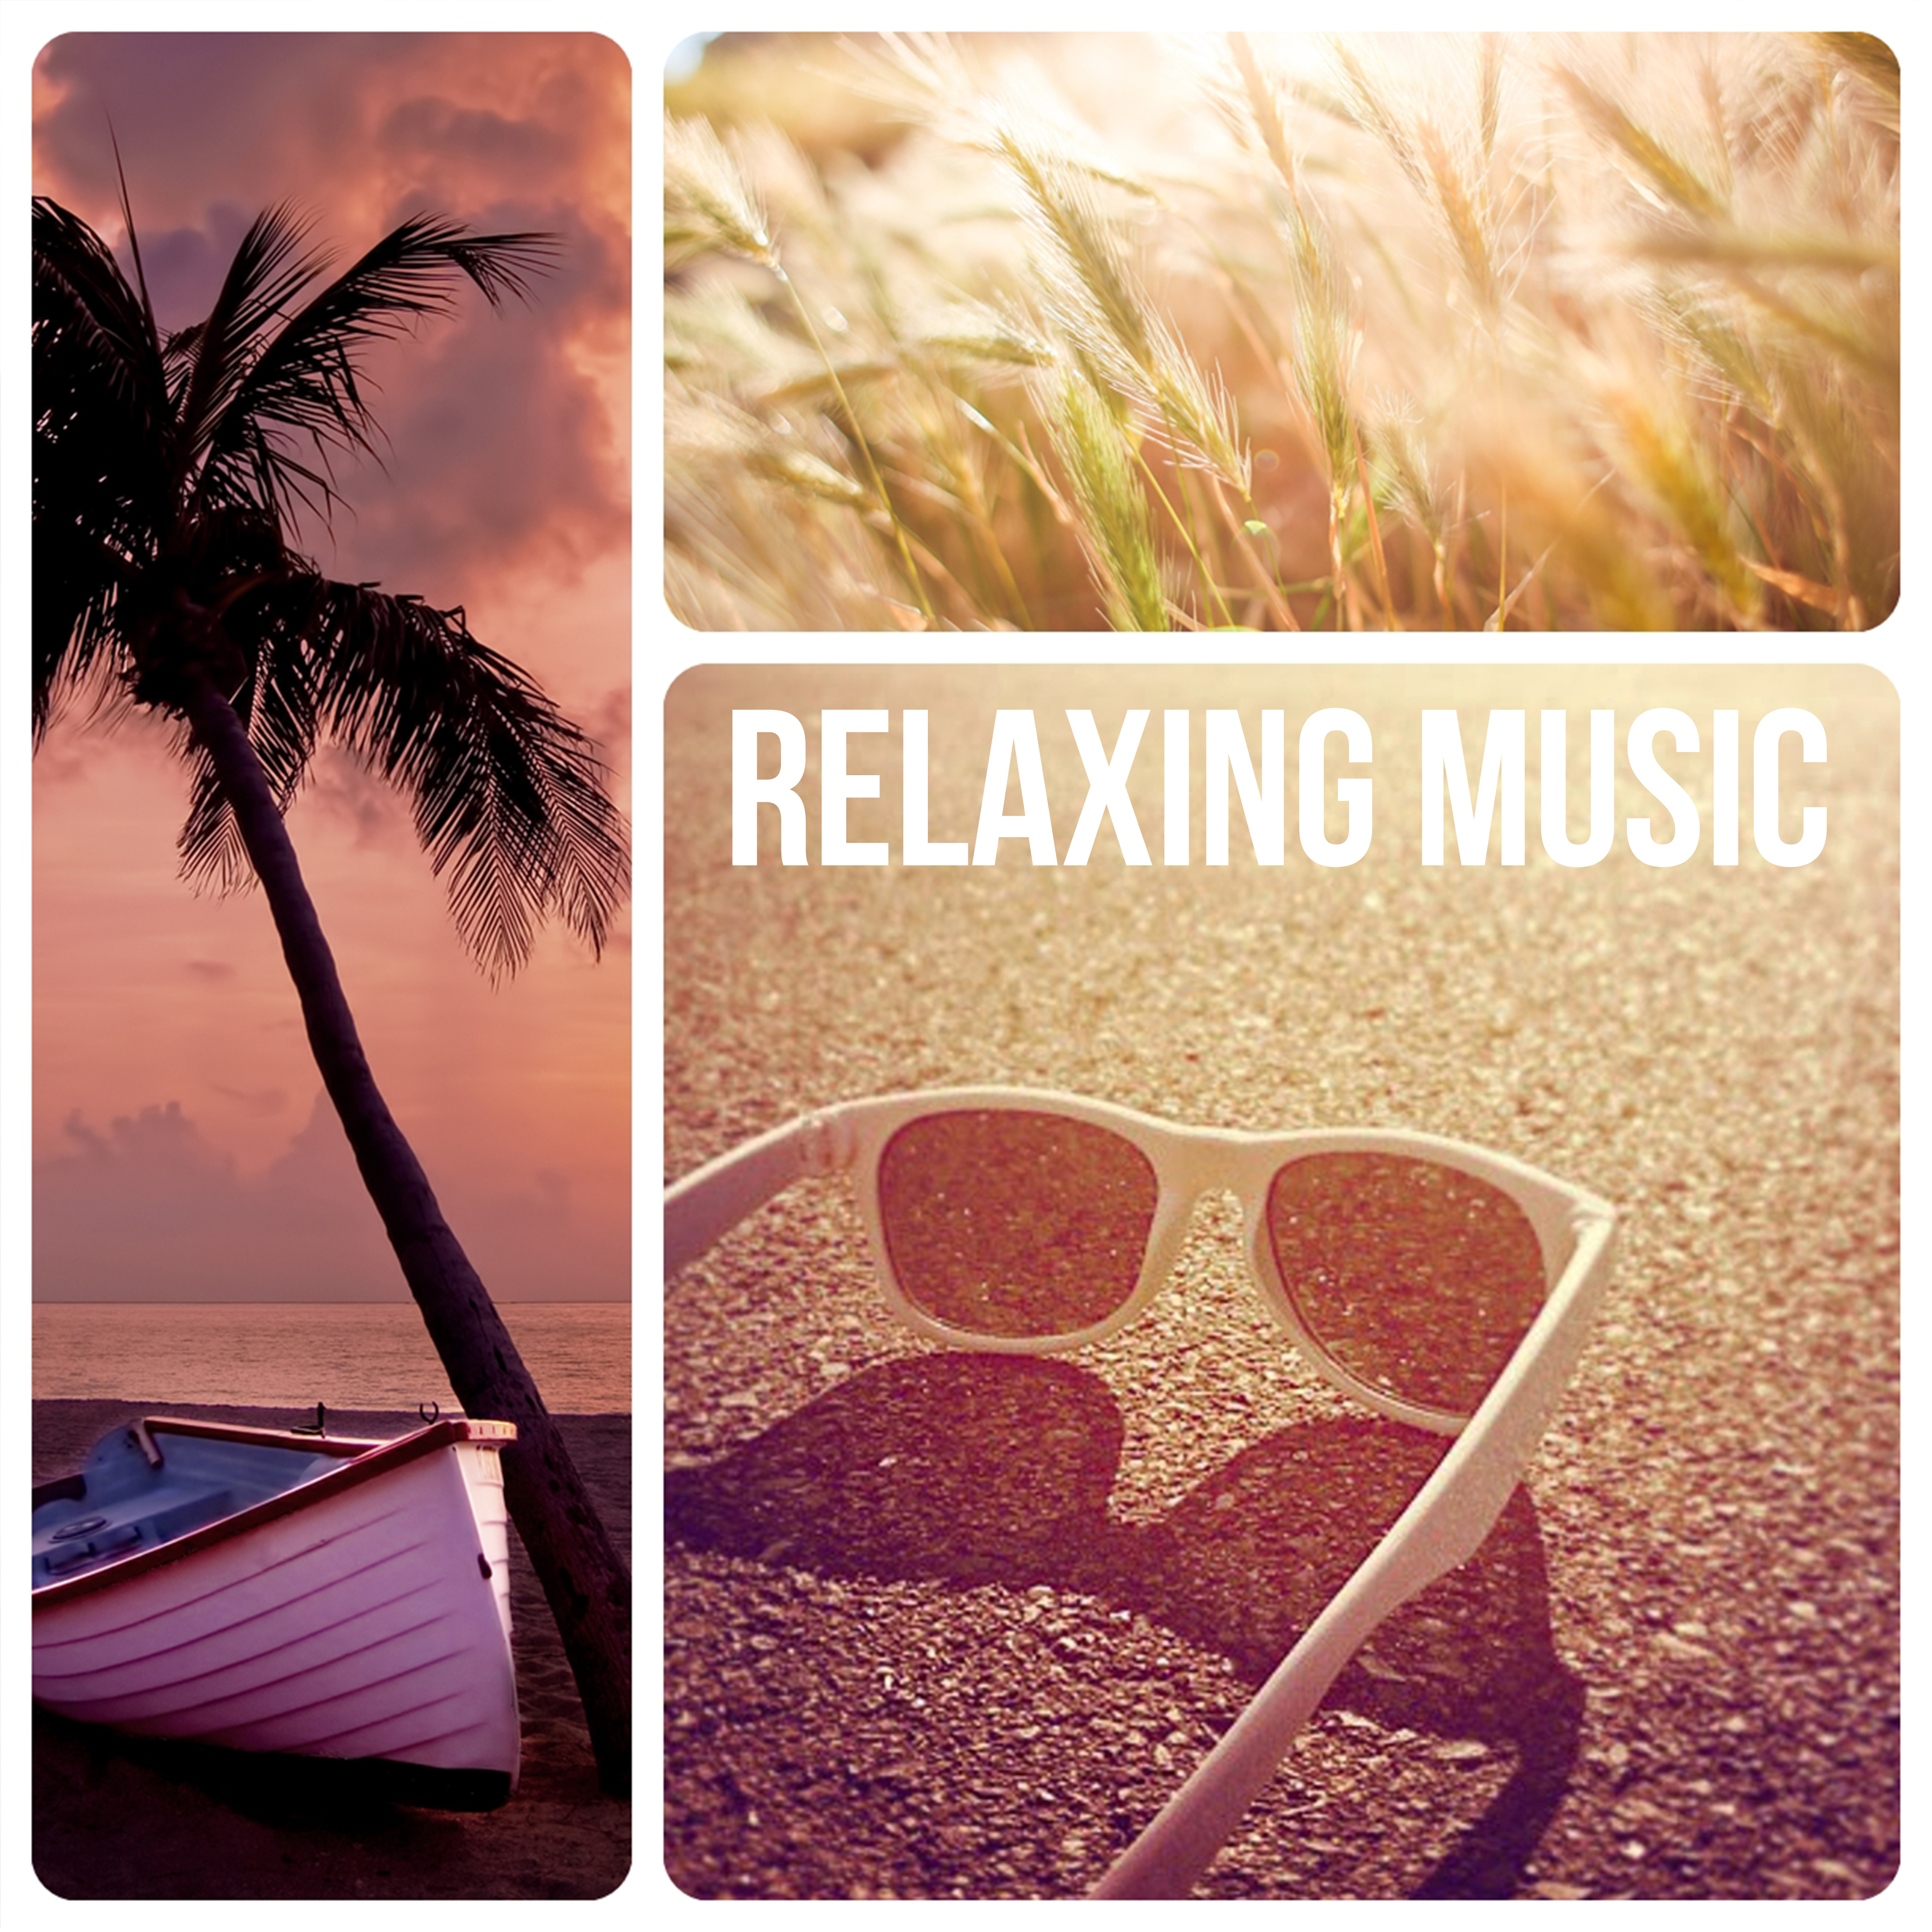 Relaxing Music - Ultimate Natural Spa Music Collection with Nature Sounds, Sound Therapy for Stress Relief, Healing Through Sound and Touch, Sensual Music for Aromatherapy and Massage